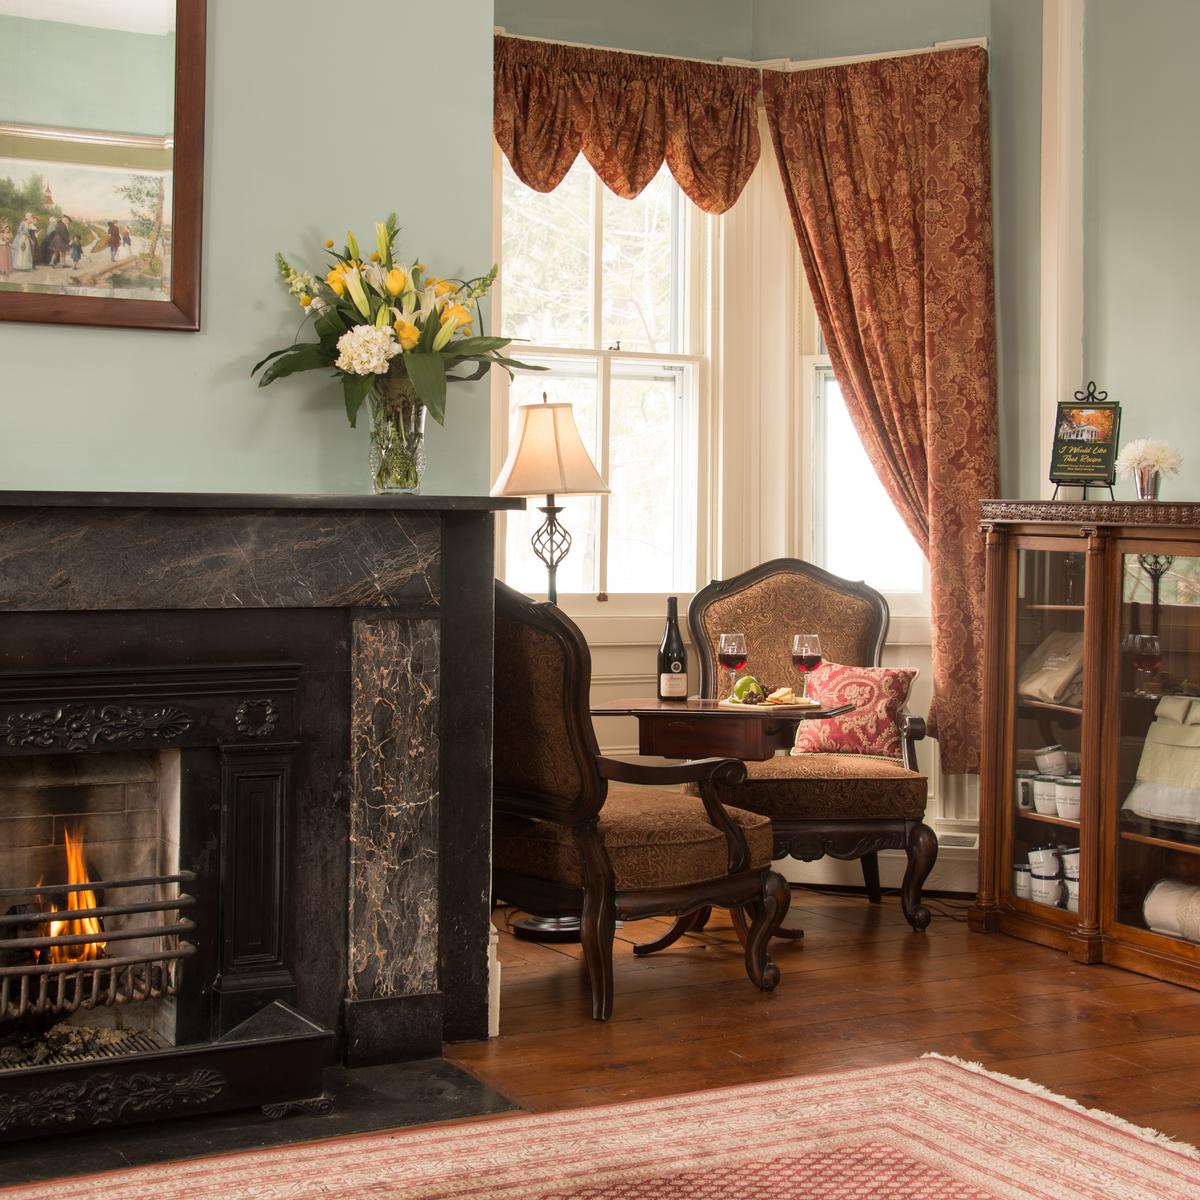 The parlor at Caldwell House Bed & Breakfast. (Courtesy of Caldwell House Bed & Breakfast)